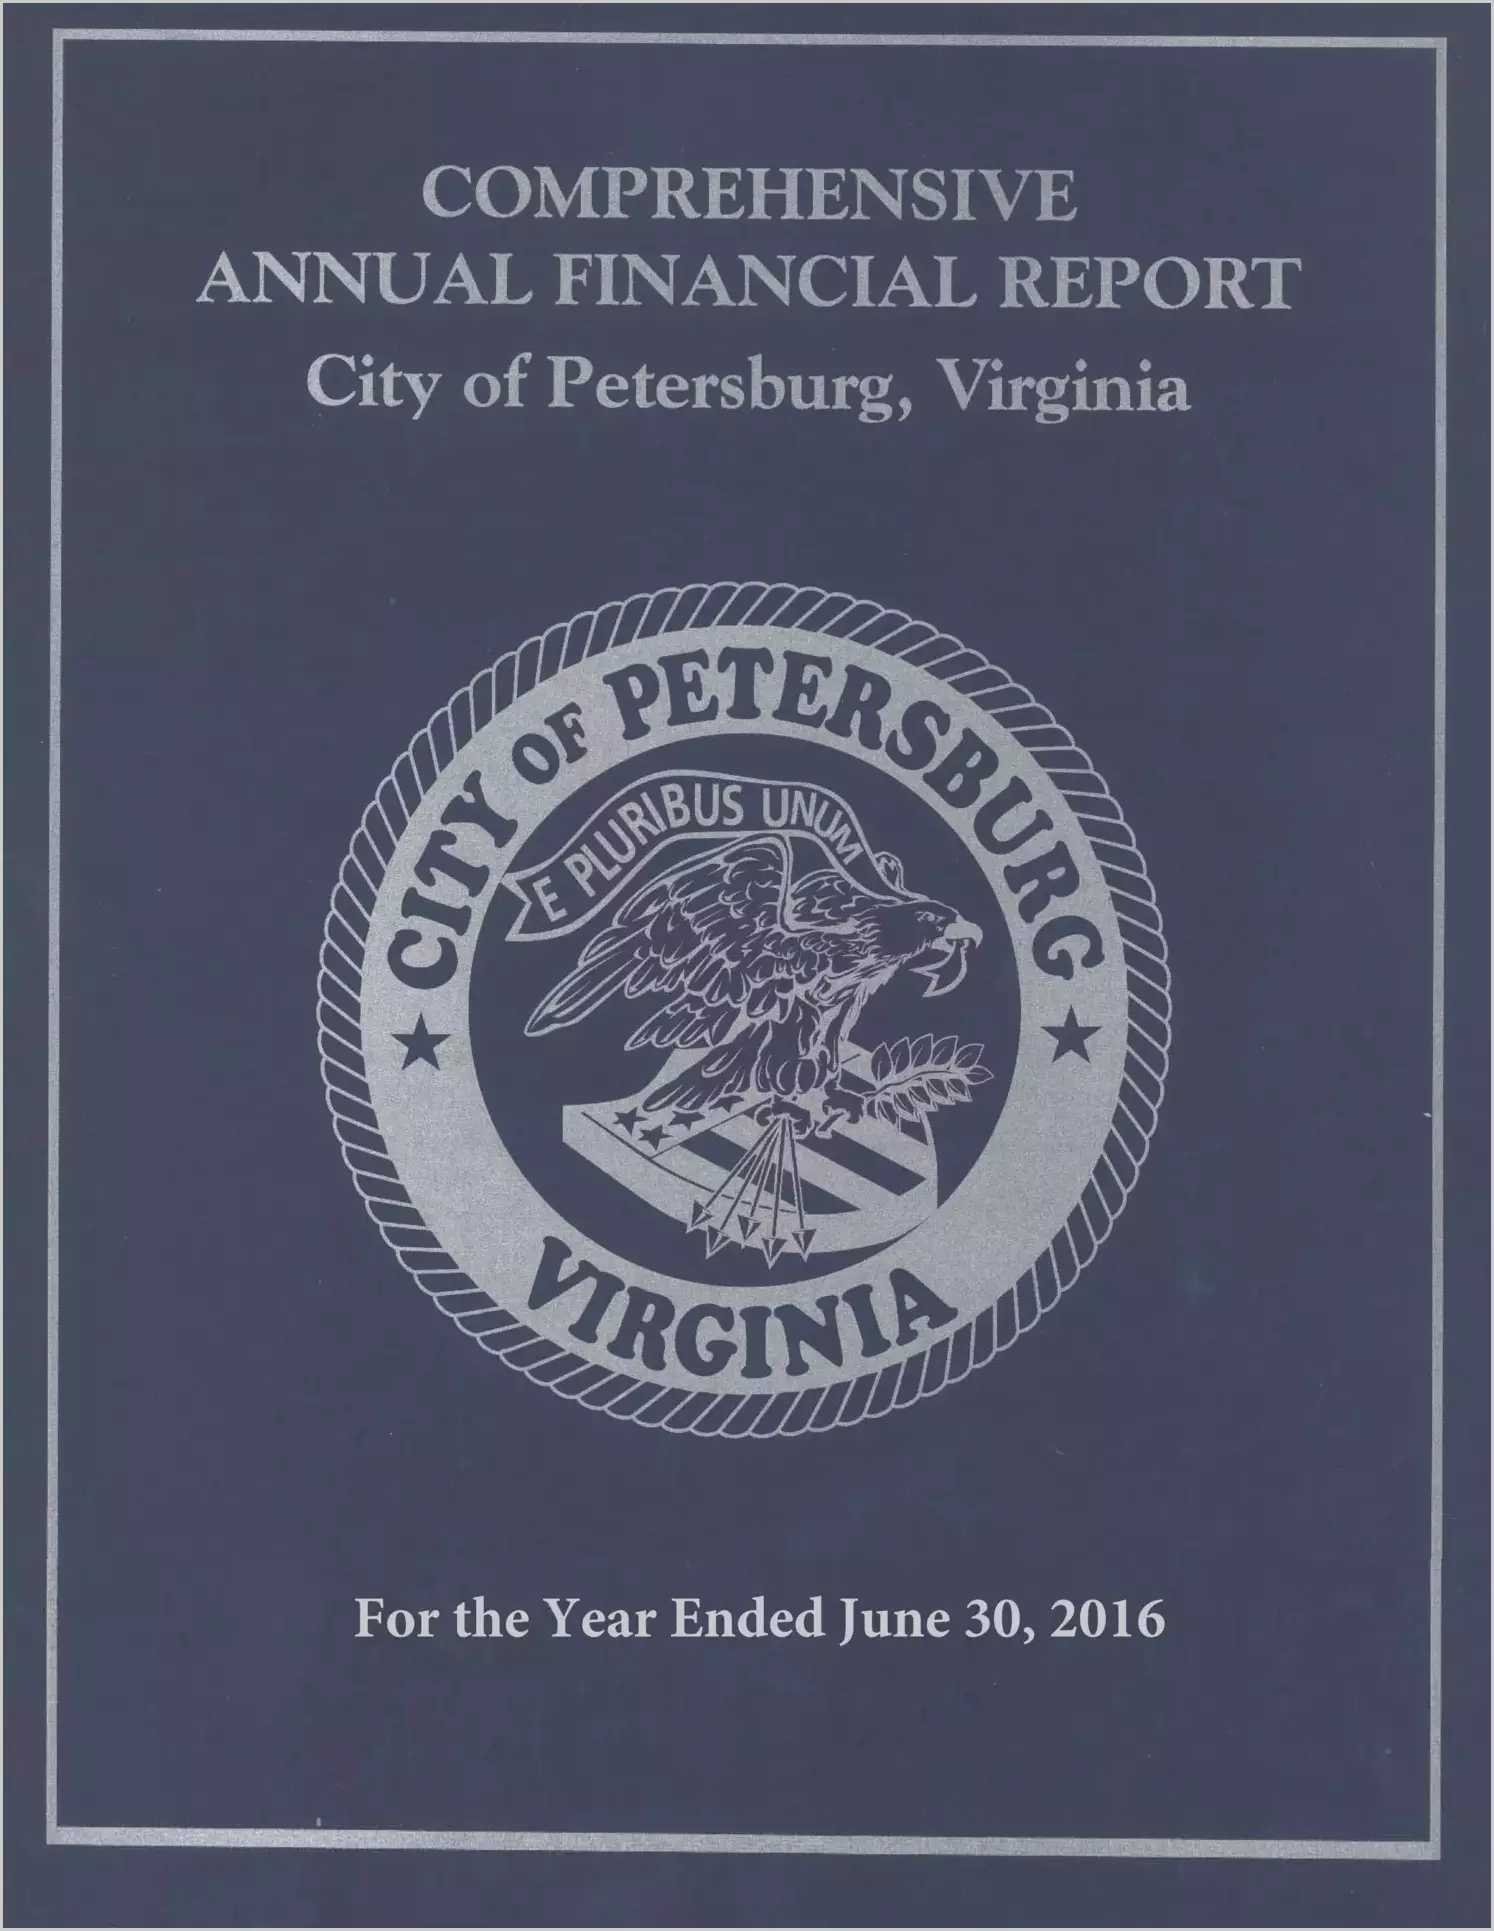 2016 Annual Financial Report for City of Petersburg